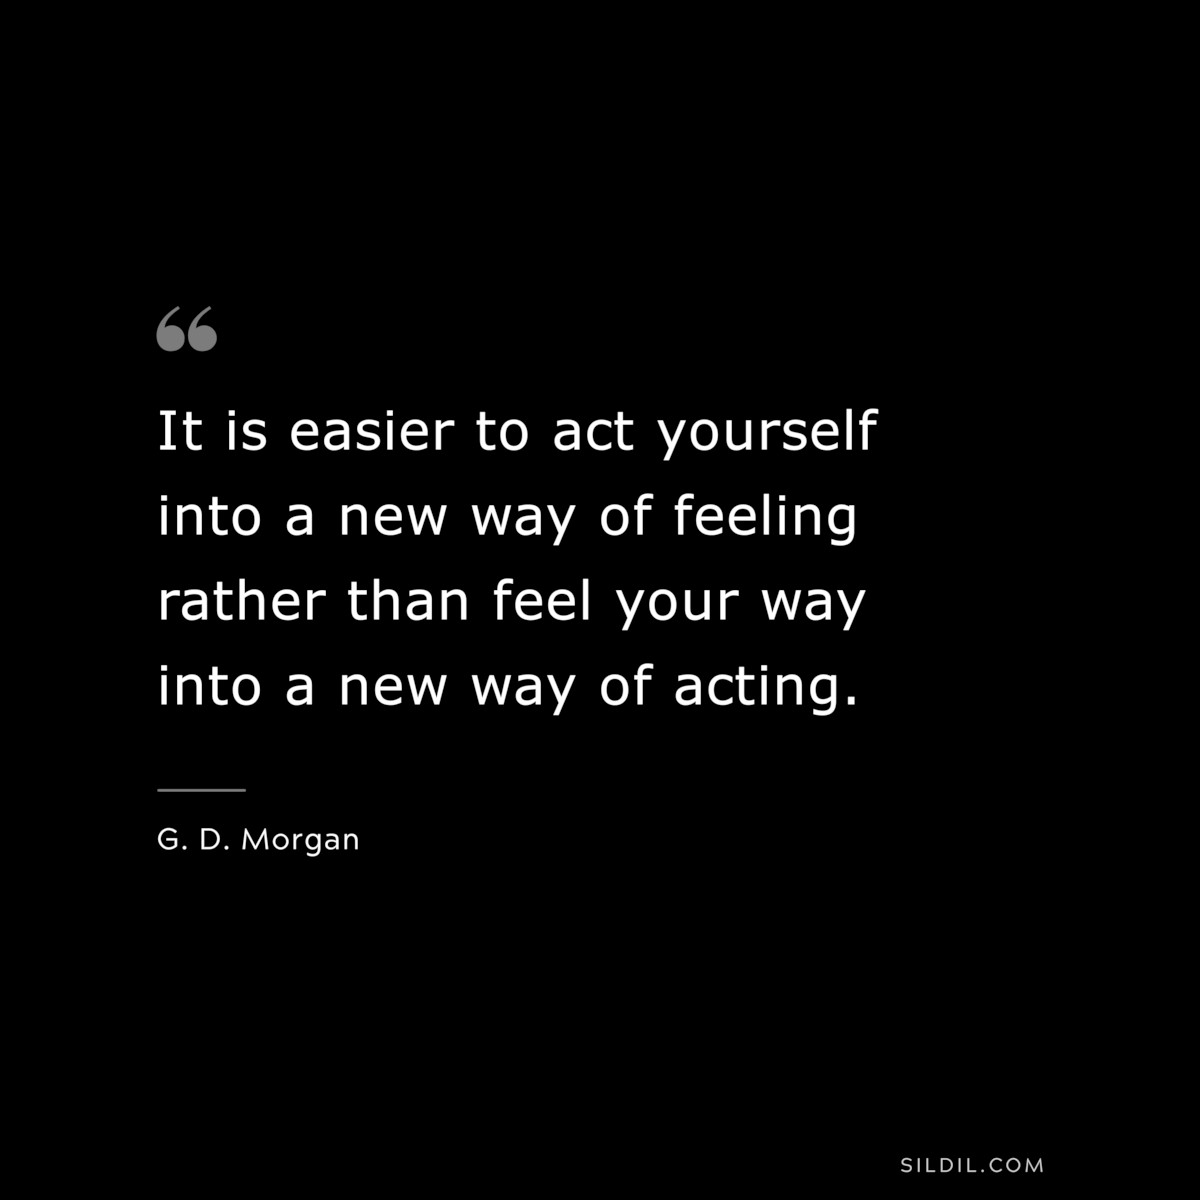 It is easier to act yourself into a new way of feeling rather than feel your way into a new way of acting. ― G. D. Morgan